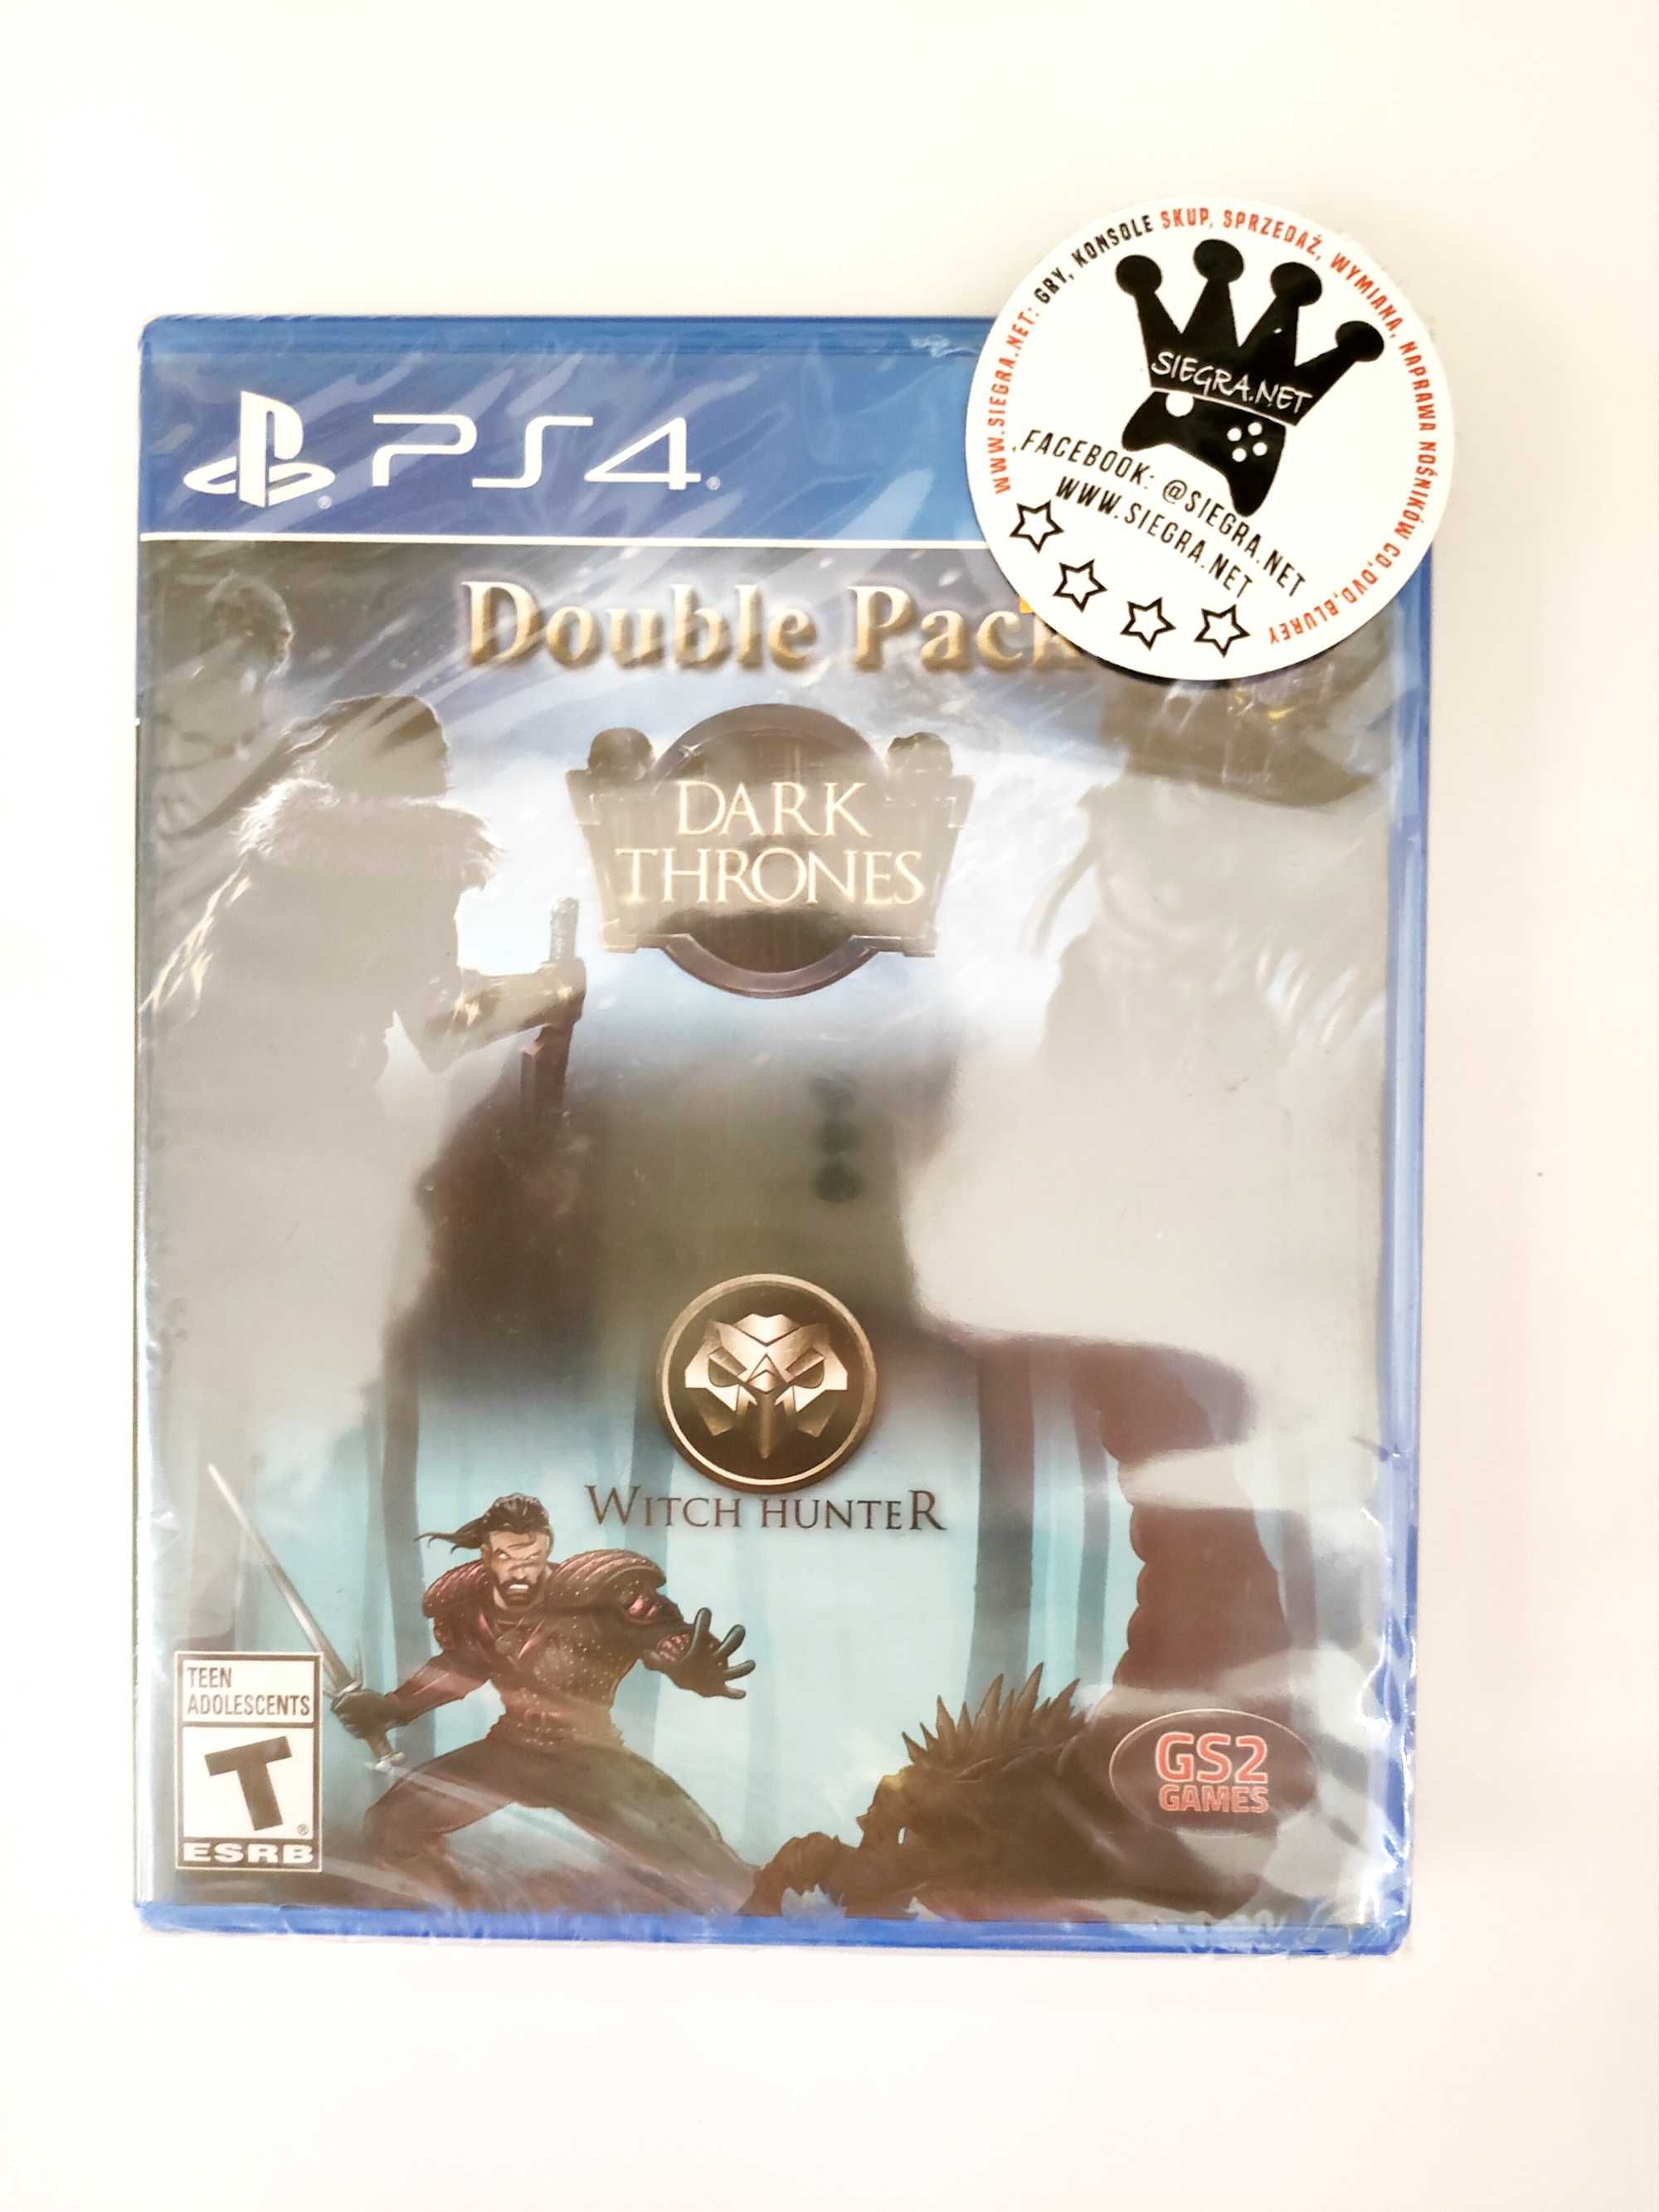 Dark Thrones / Witch Hunter Double Pack Ps4 nowa